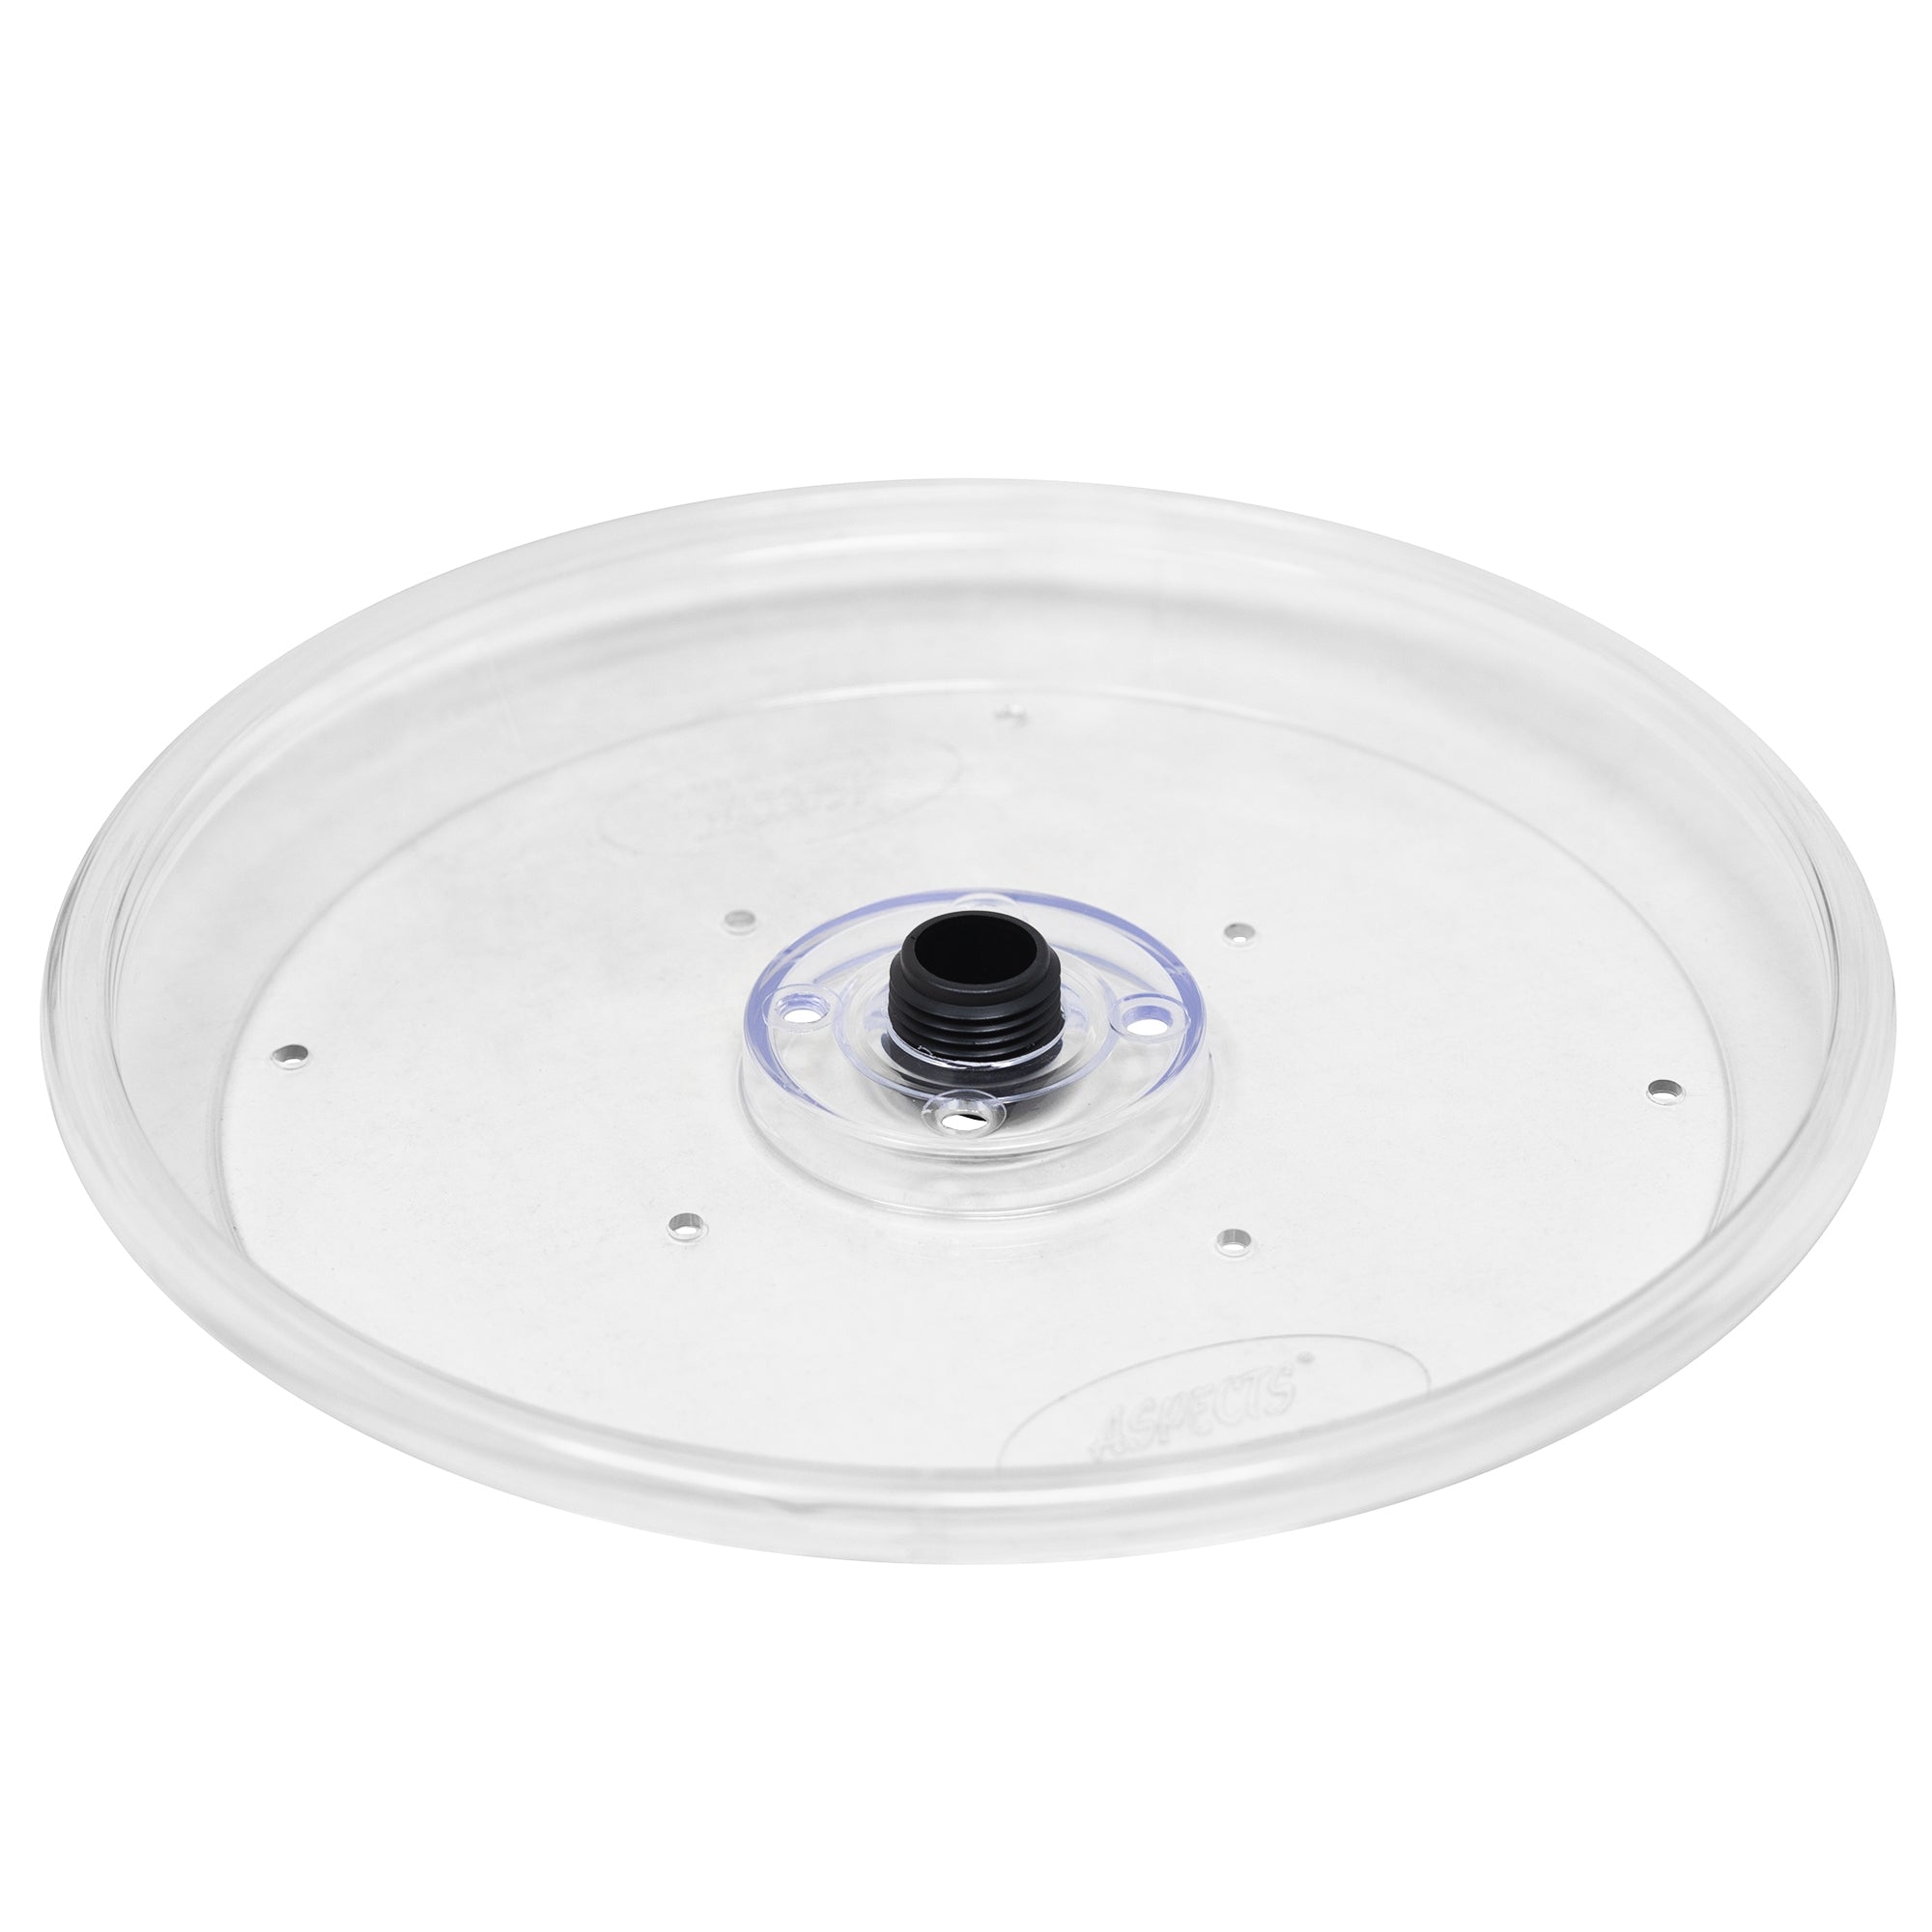 Aspects (ASP050) Round Seed Tray, 8.5 diameter